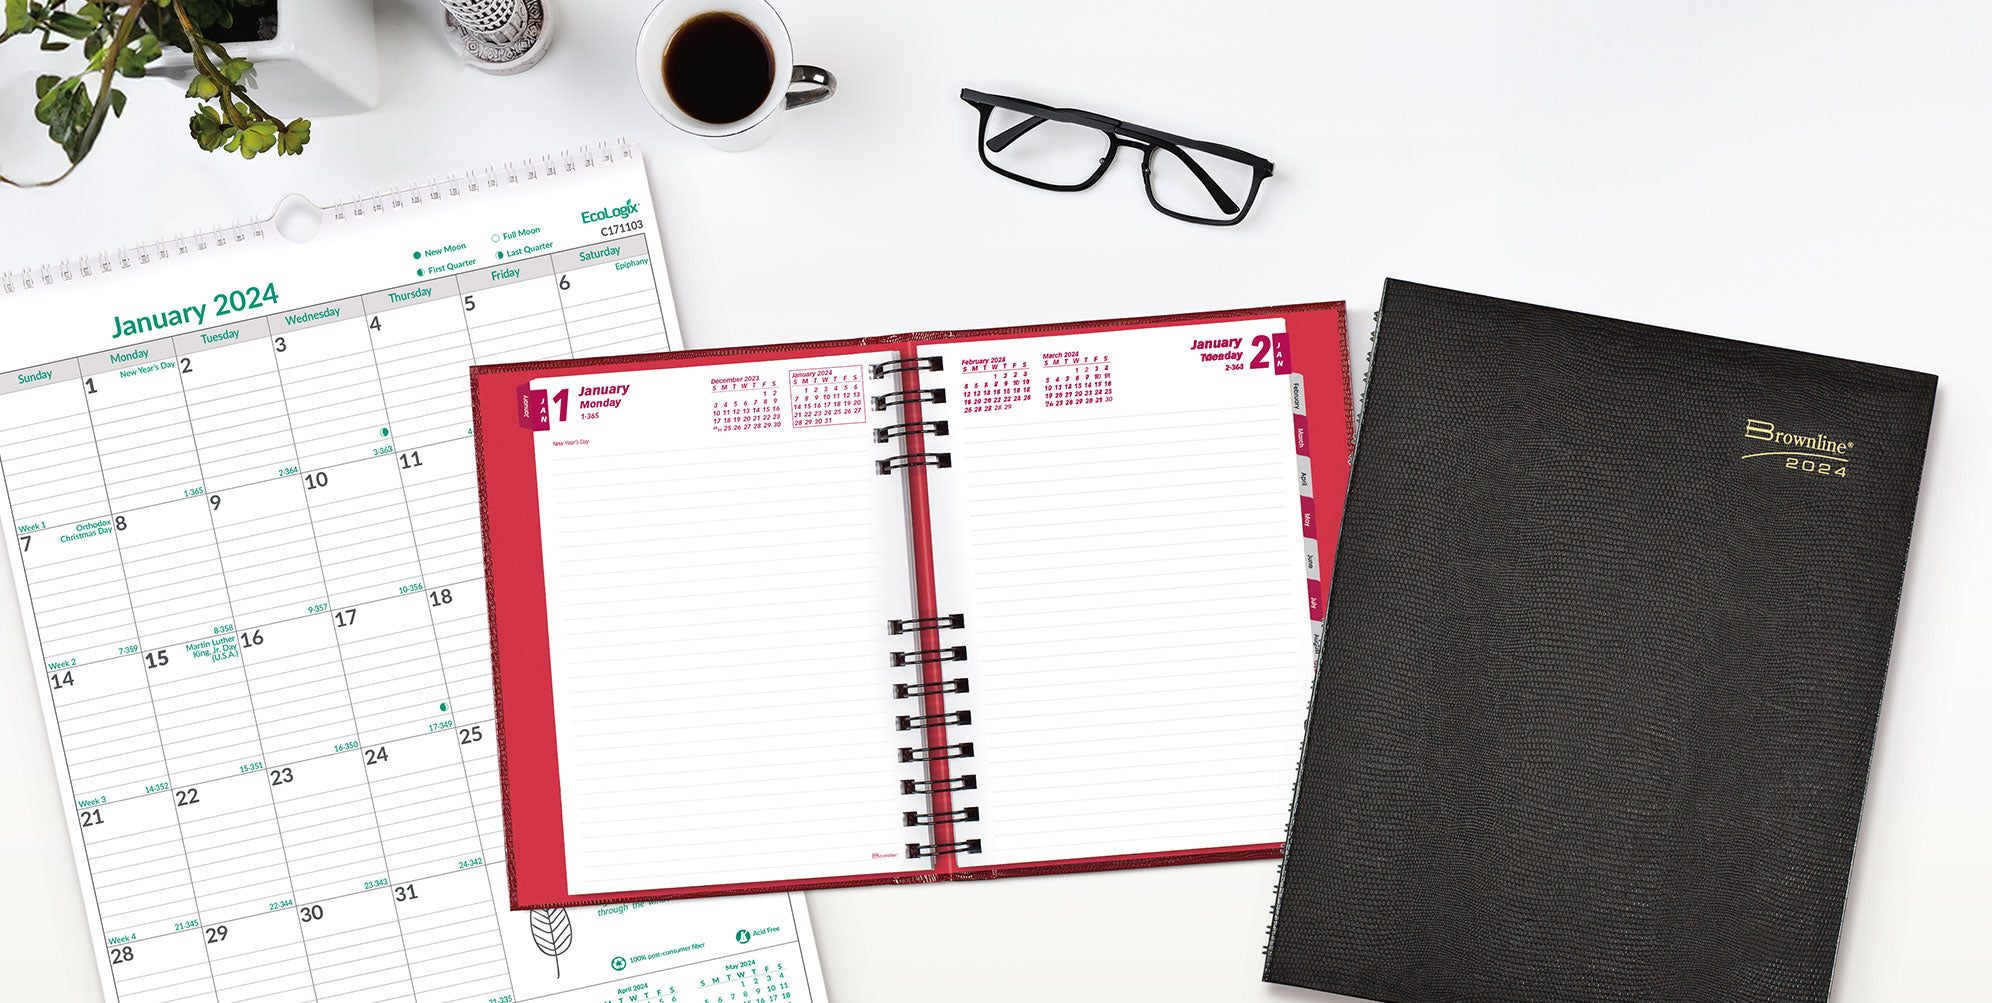 50% Off Brownline 2024 Planners and Calendars 